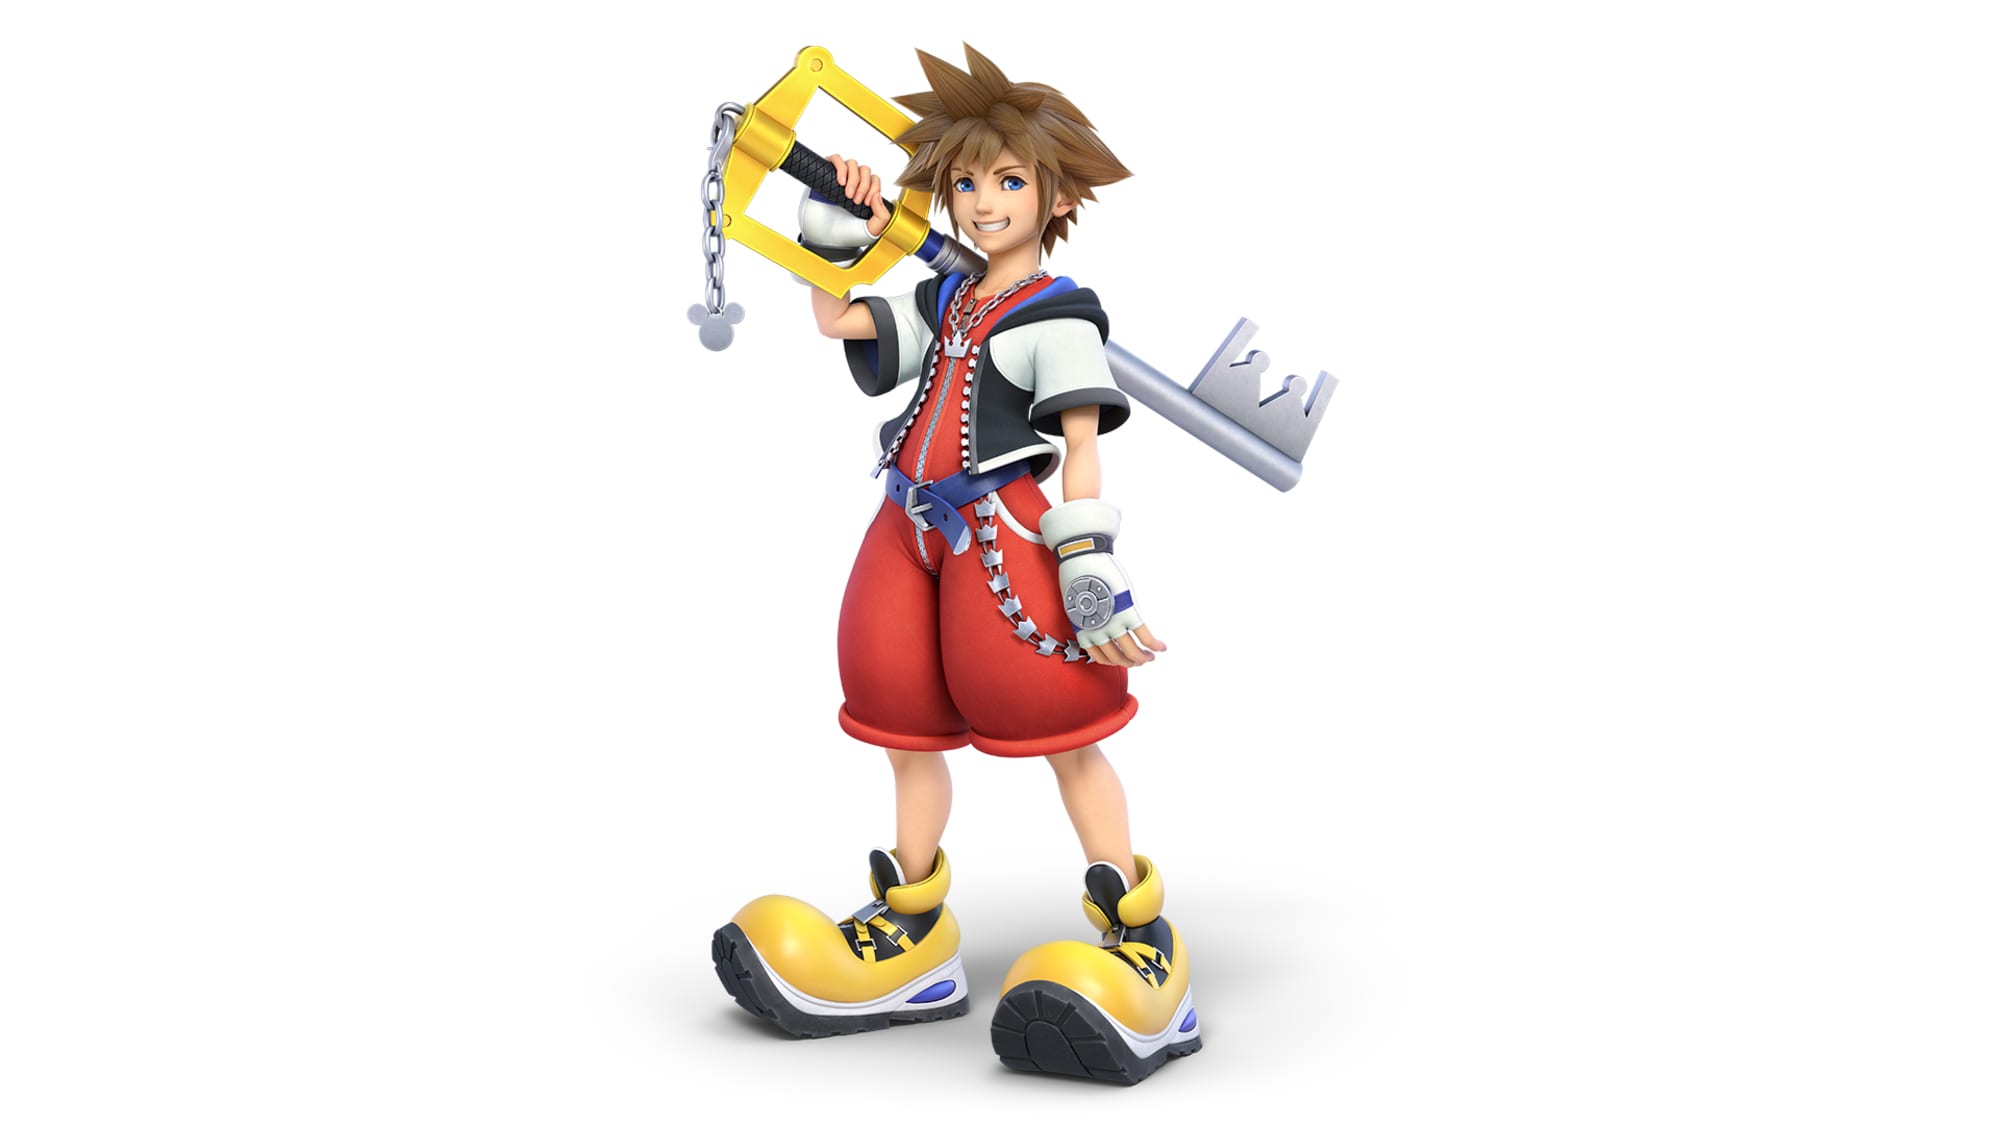 Sora is the final Super Smash Bros. DLC character and I'm ...